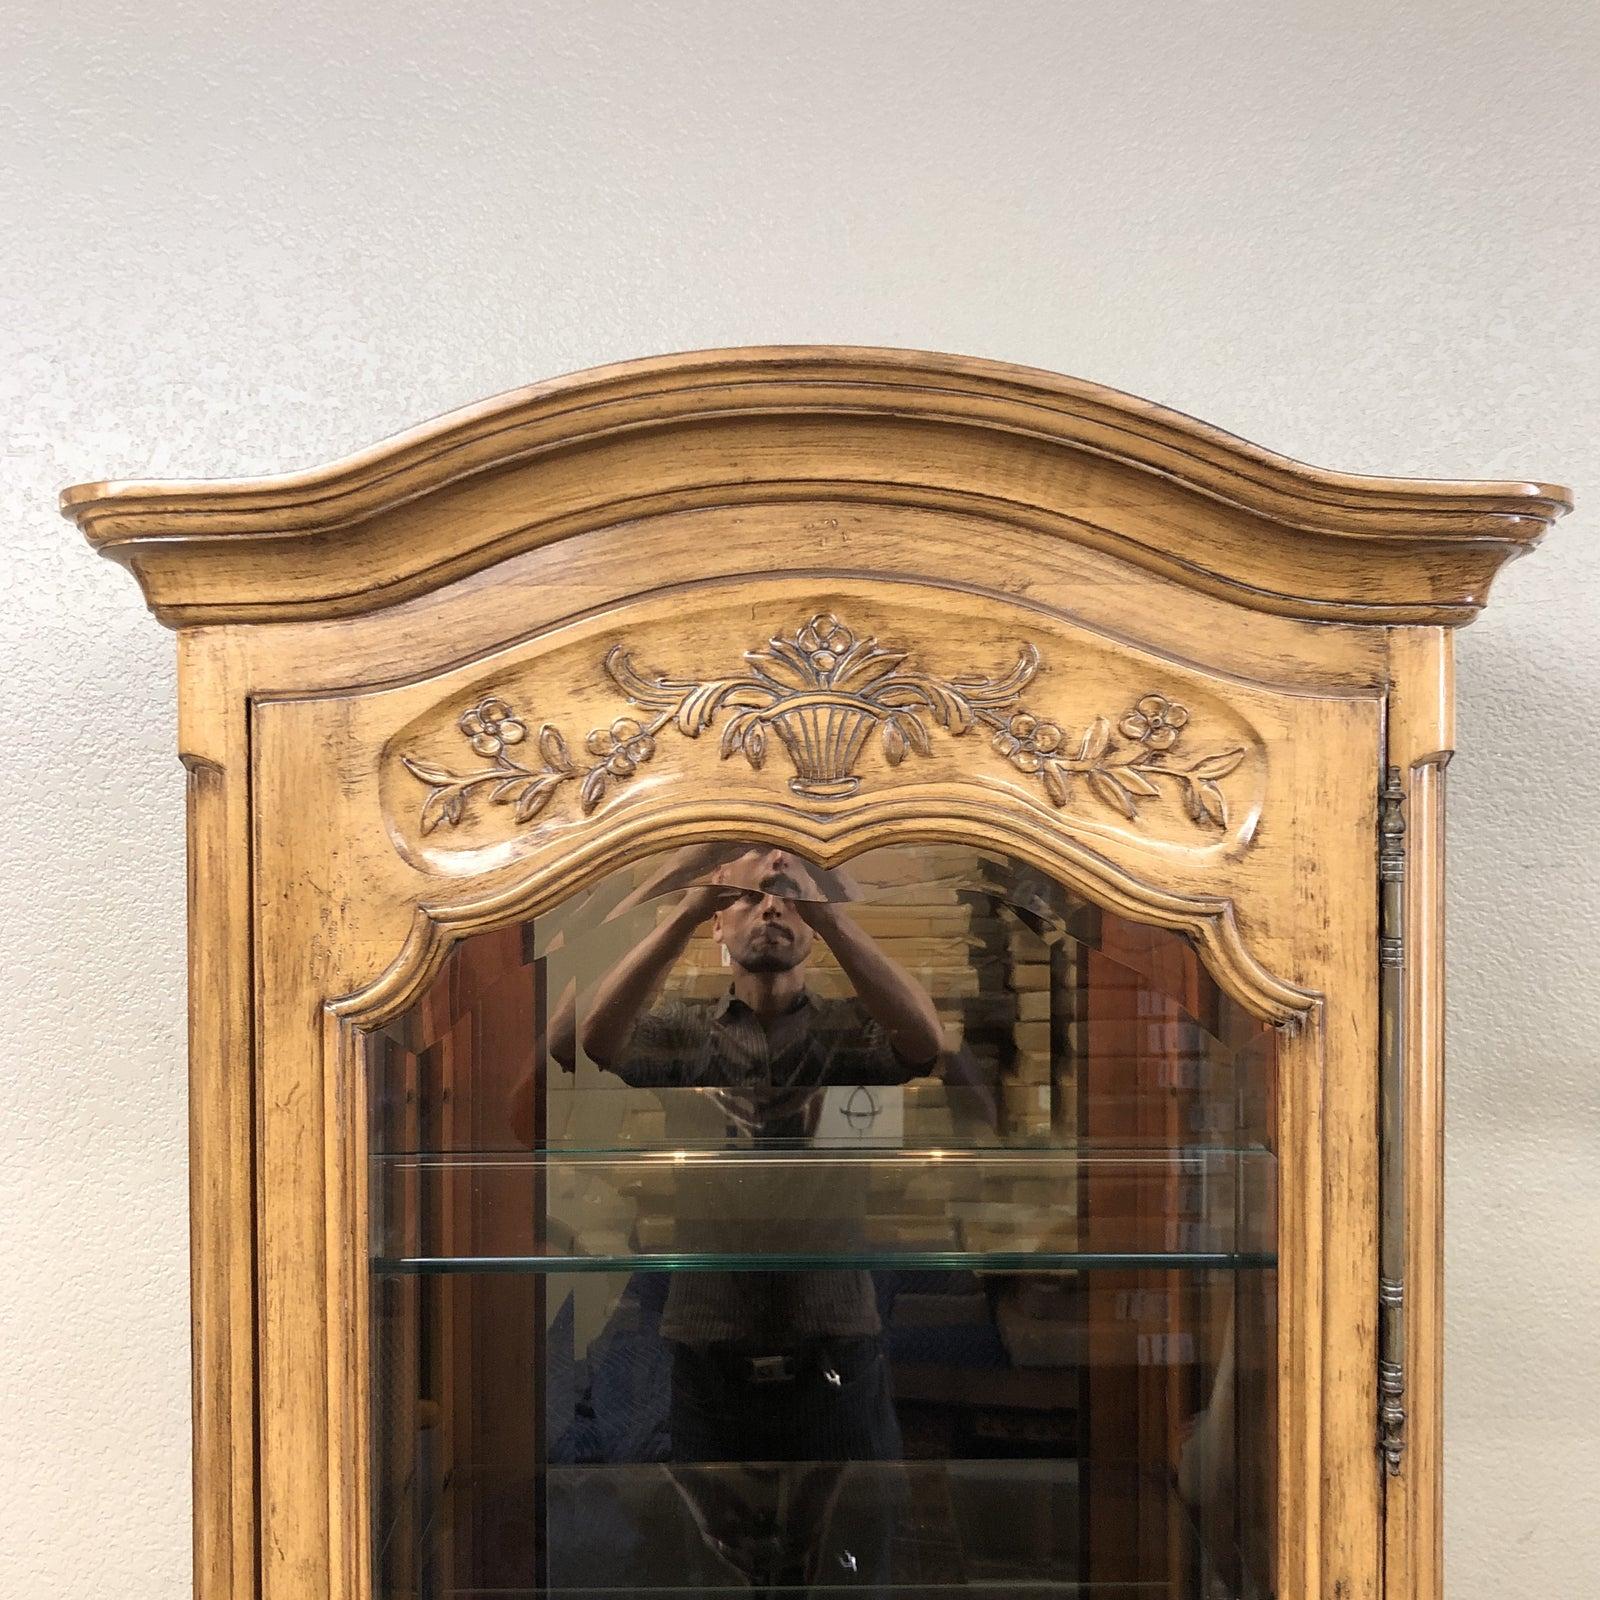 A French Provincial styled Curio cabinet. The antiqued finish highlights the traditional curves and carvings. Arched glass windows allow viewing from front and sides, the lighting from above flows all the way through the adjustable glass